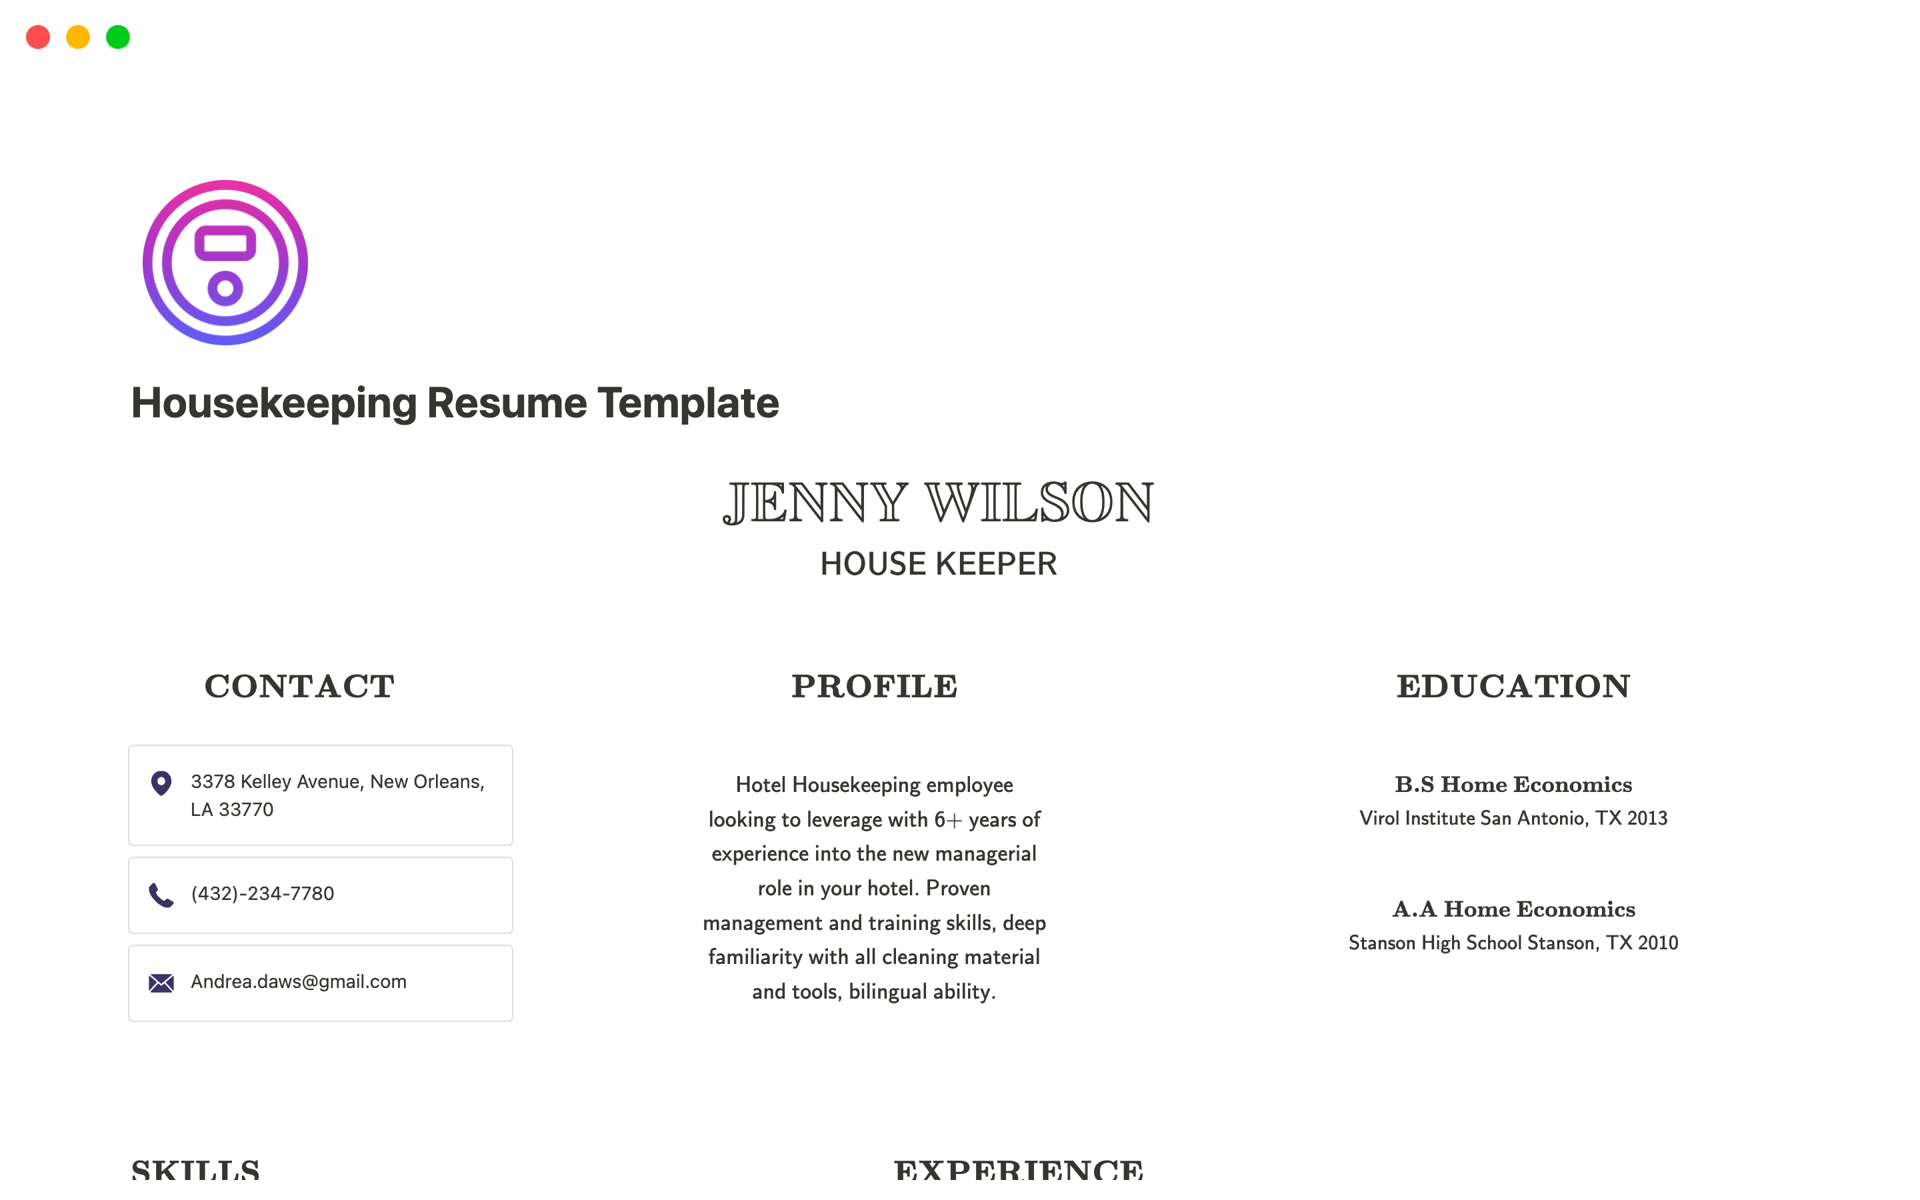 A template preview for Housekeeping Resume